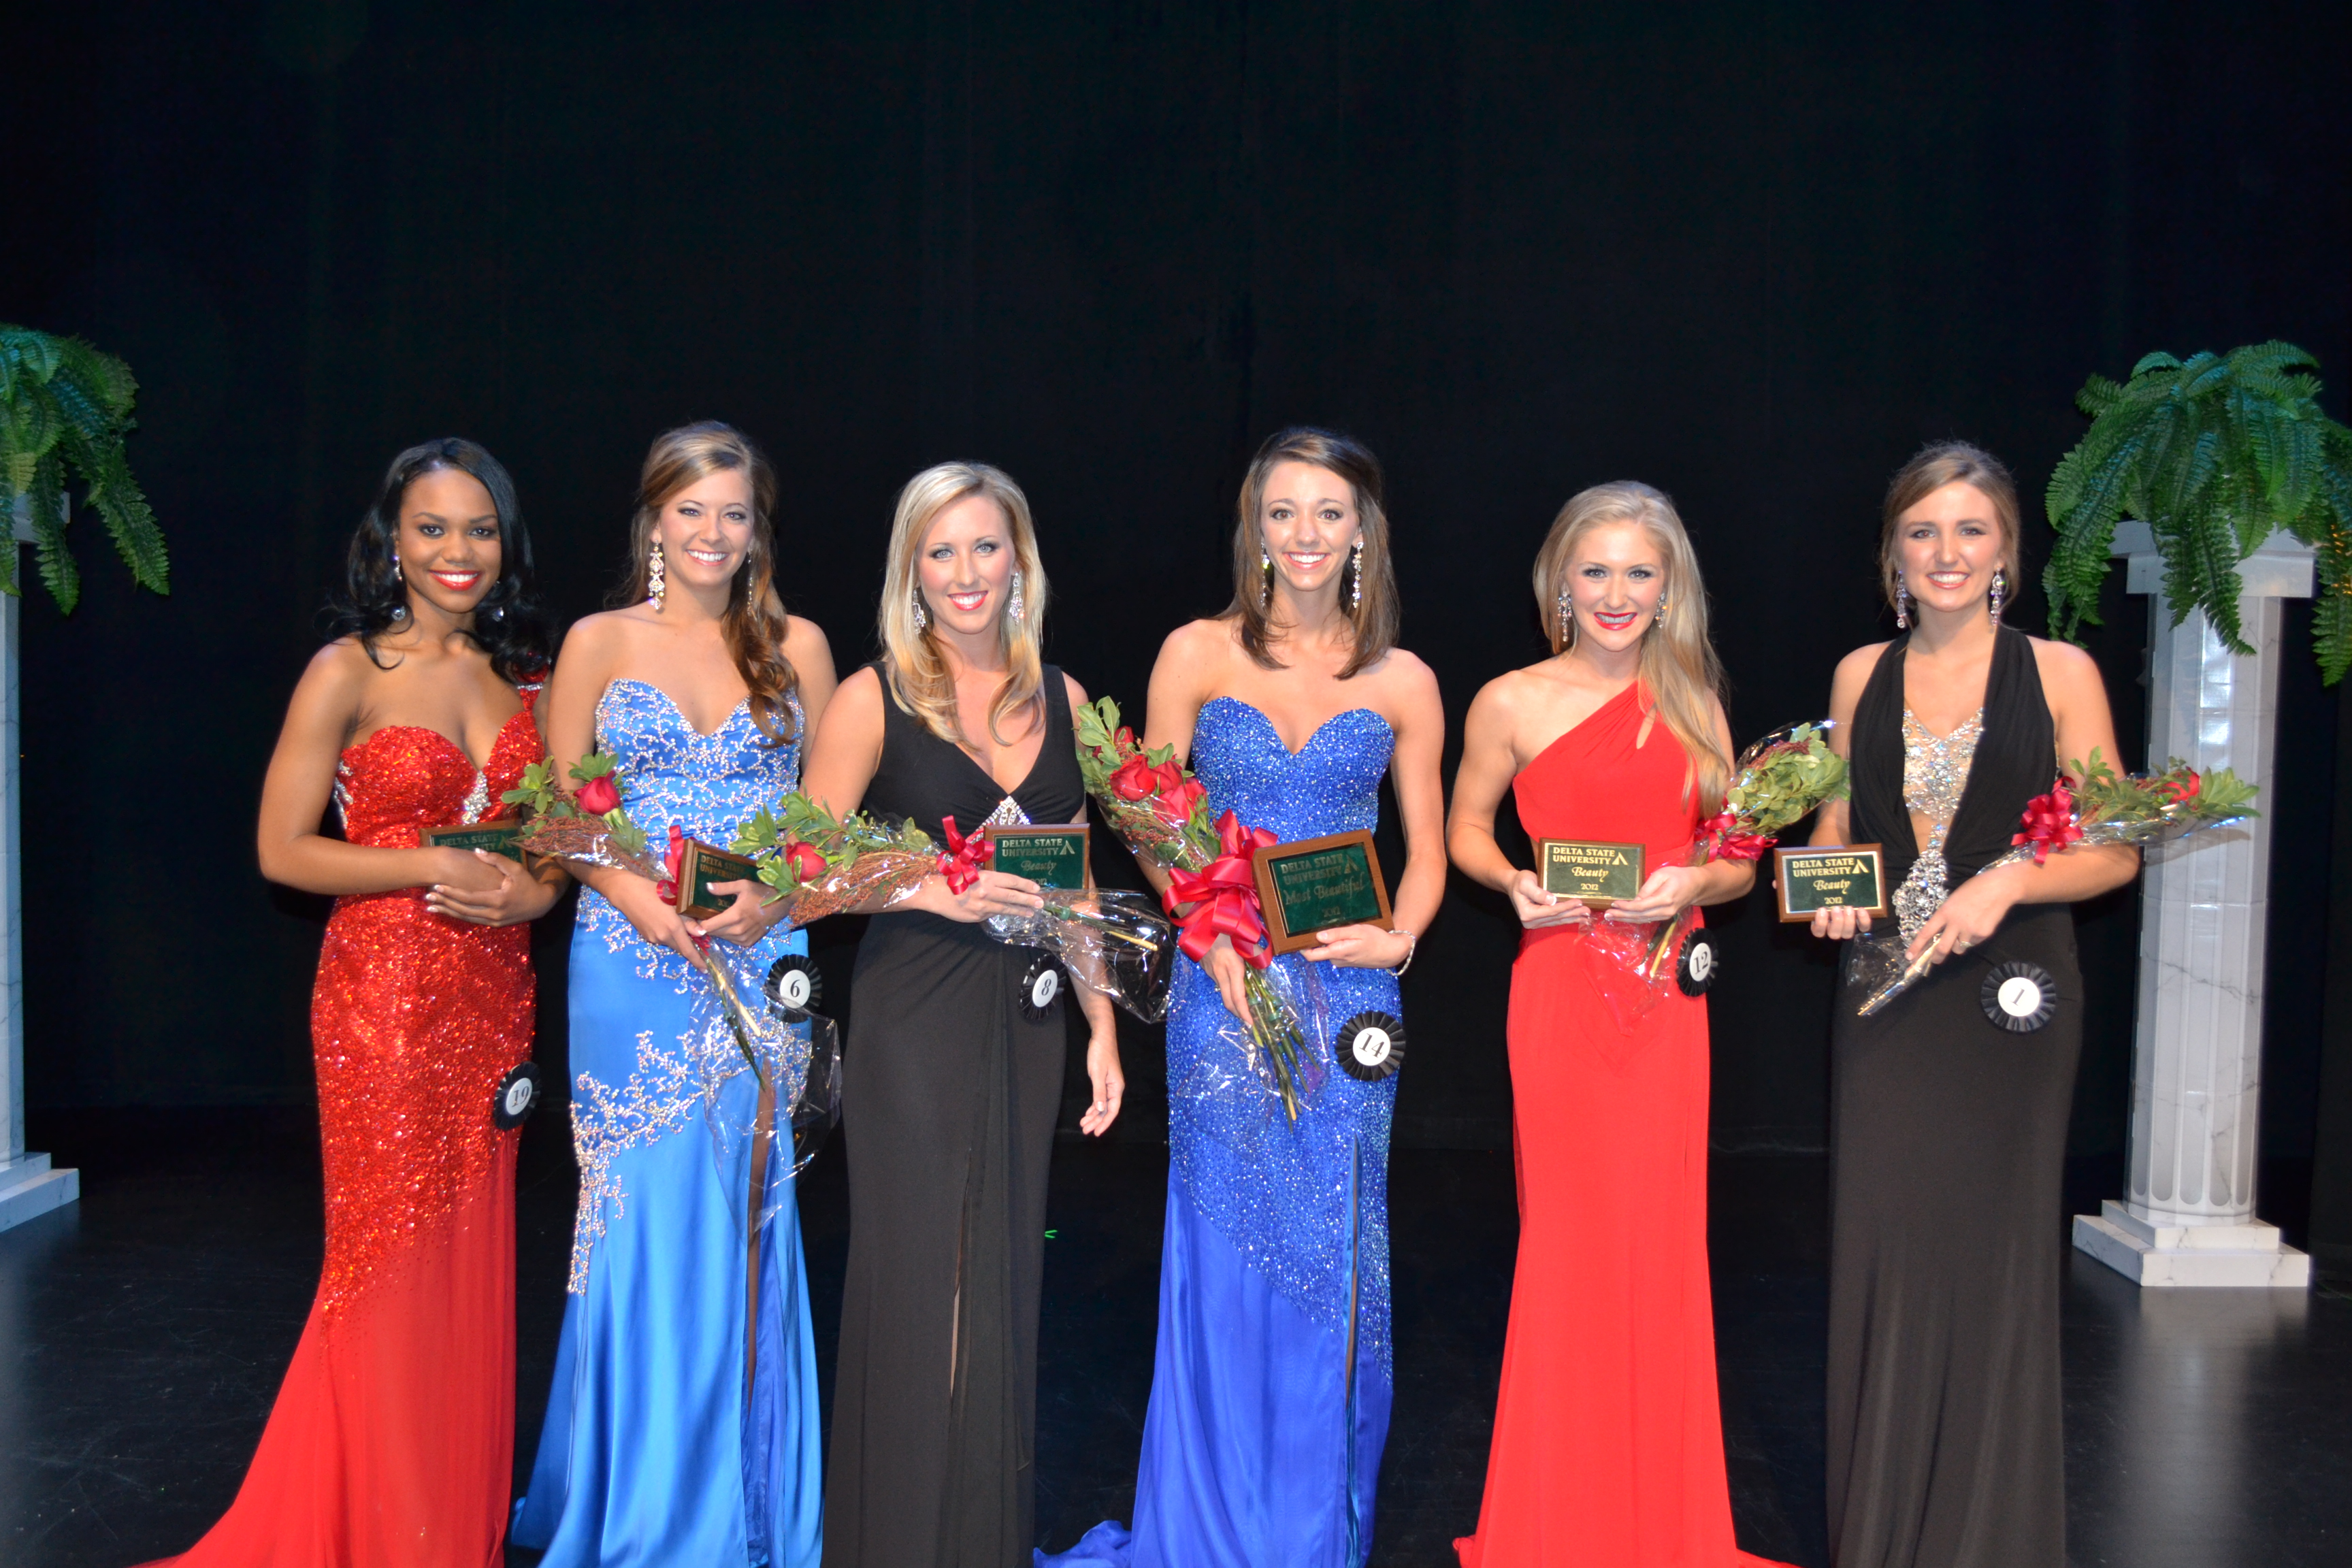 Pictured from left are: Most Photogenic Briana Sturgis, a sophomore from Brandon; Beauty Emily Ridge, a senior from Courtland; Beauty Chelsey Hill, a senior from Olive Branch; Most Beautiful Madison Greenlee, a sophomore from Batesville; Beauty Molly Slonaker, a senior from Clinton,  and Beauty Molly Carol Harlow, a sophomore from  Brandon.